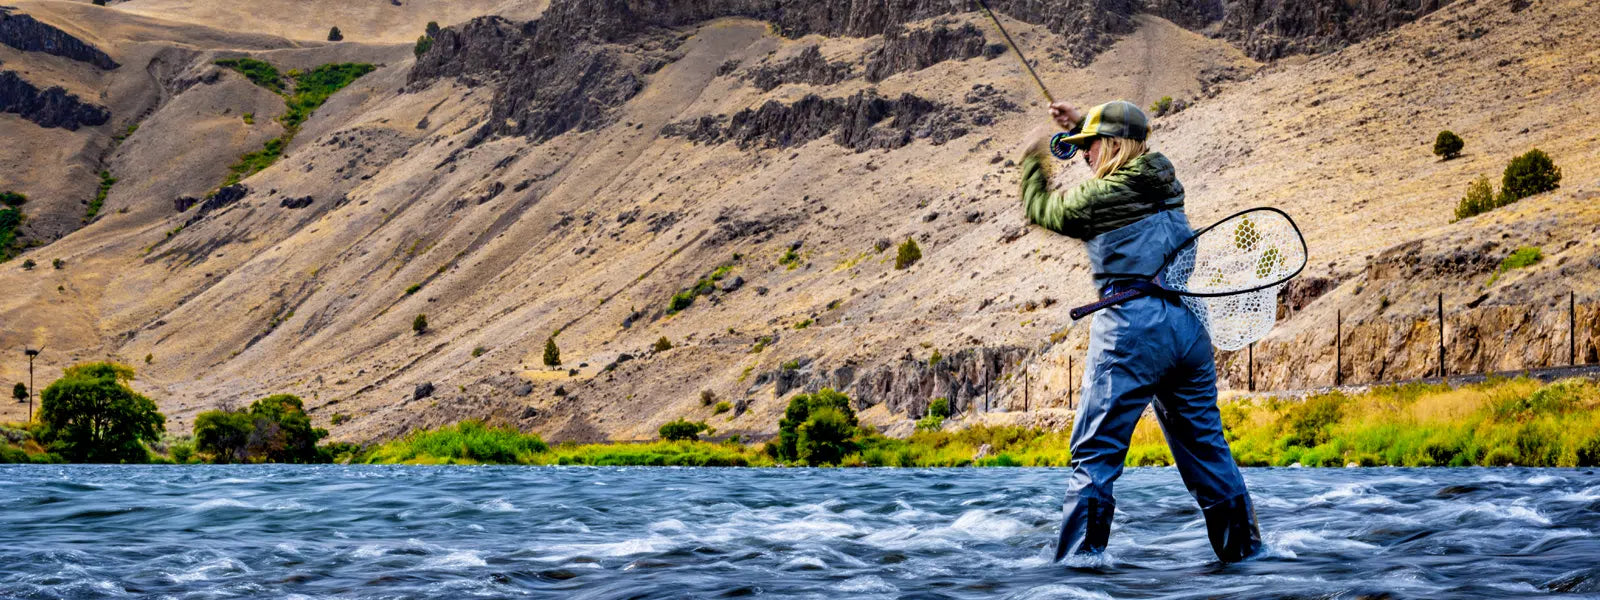 Sales & Savings, The Best Fly Fishing Deals